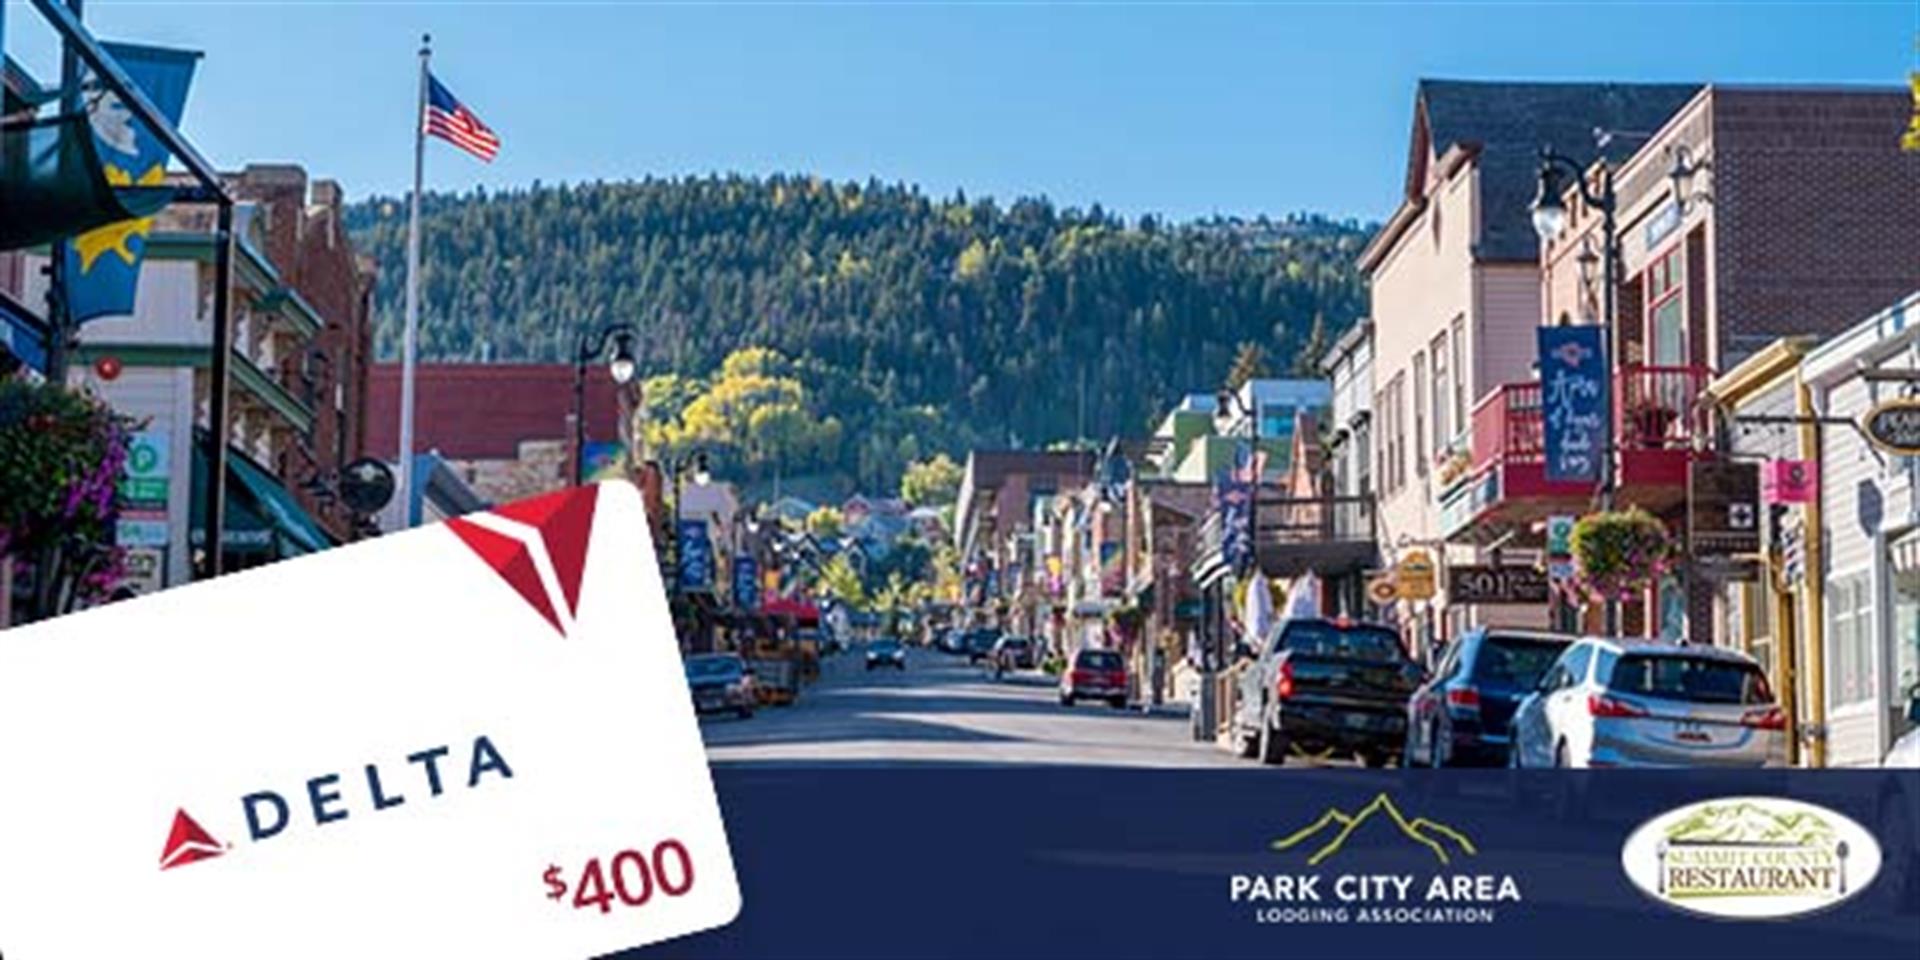 Stay in our premier vacation rental and receive a 400 Delta Airline gift card on us.